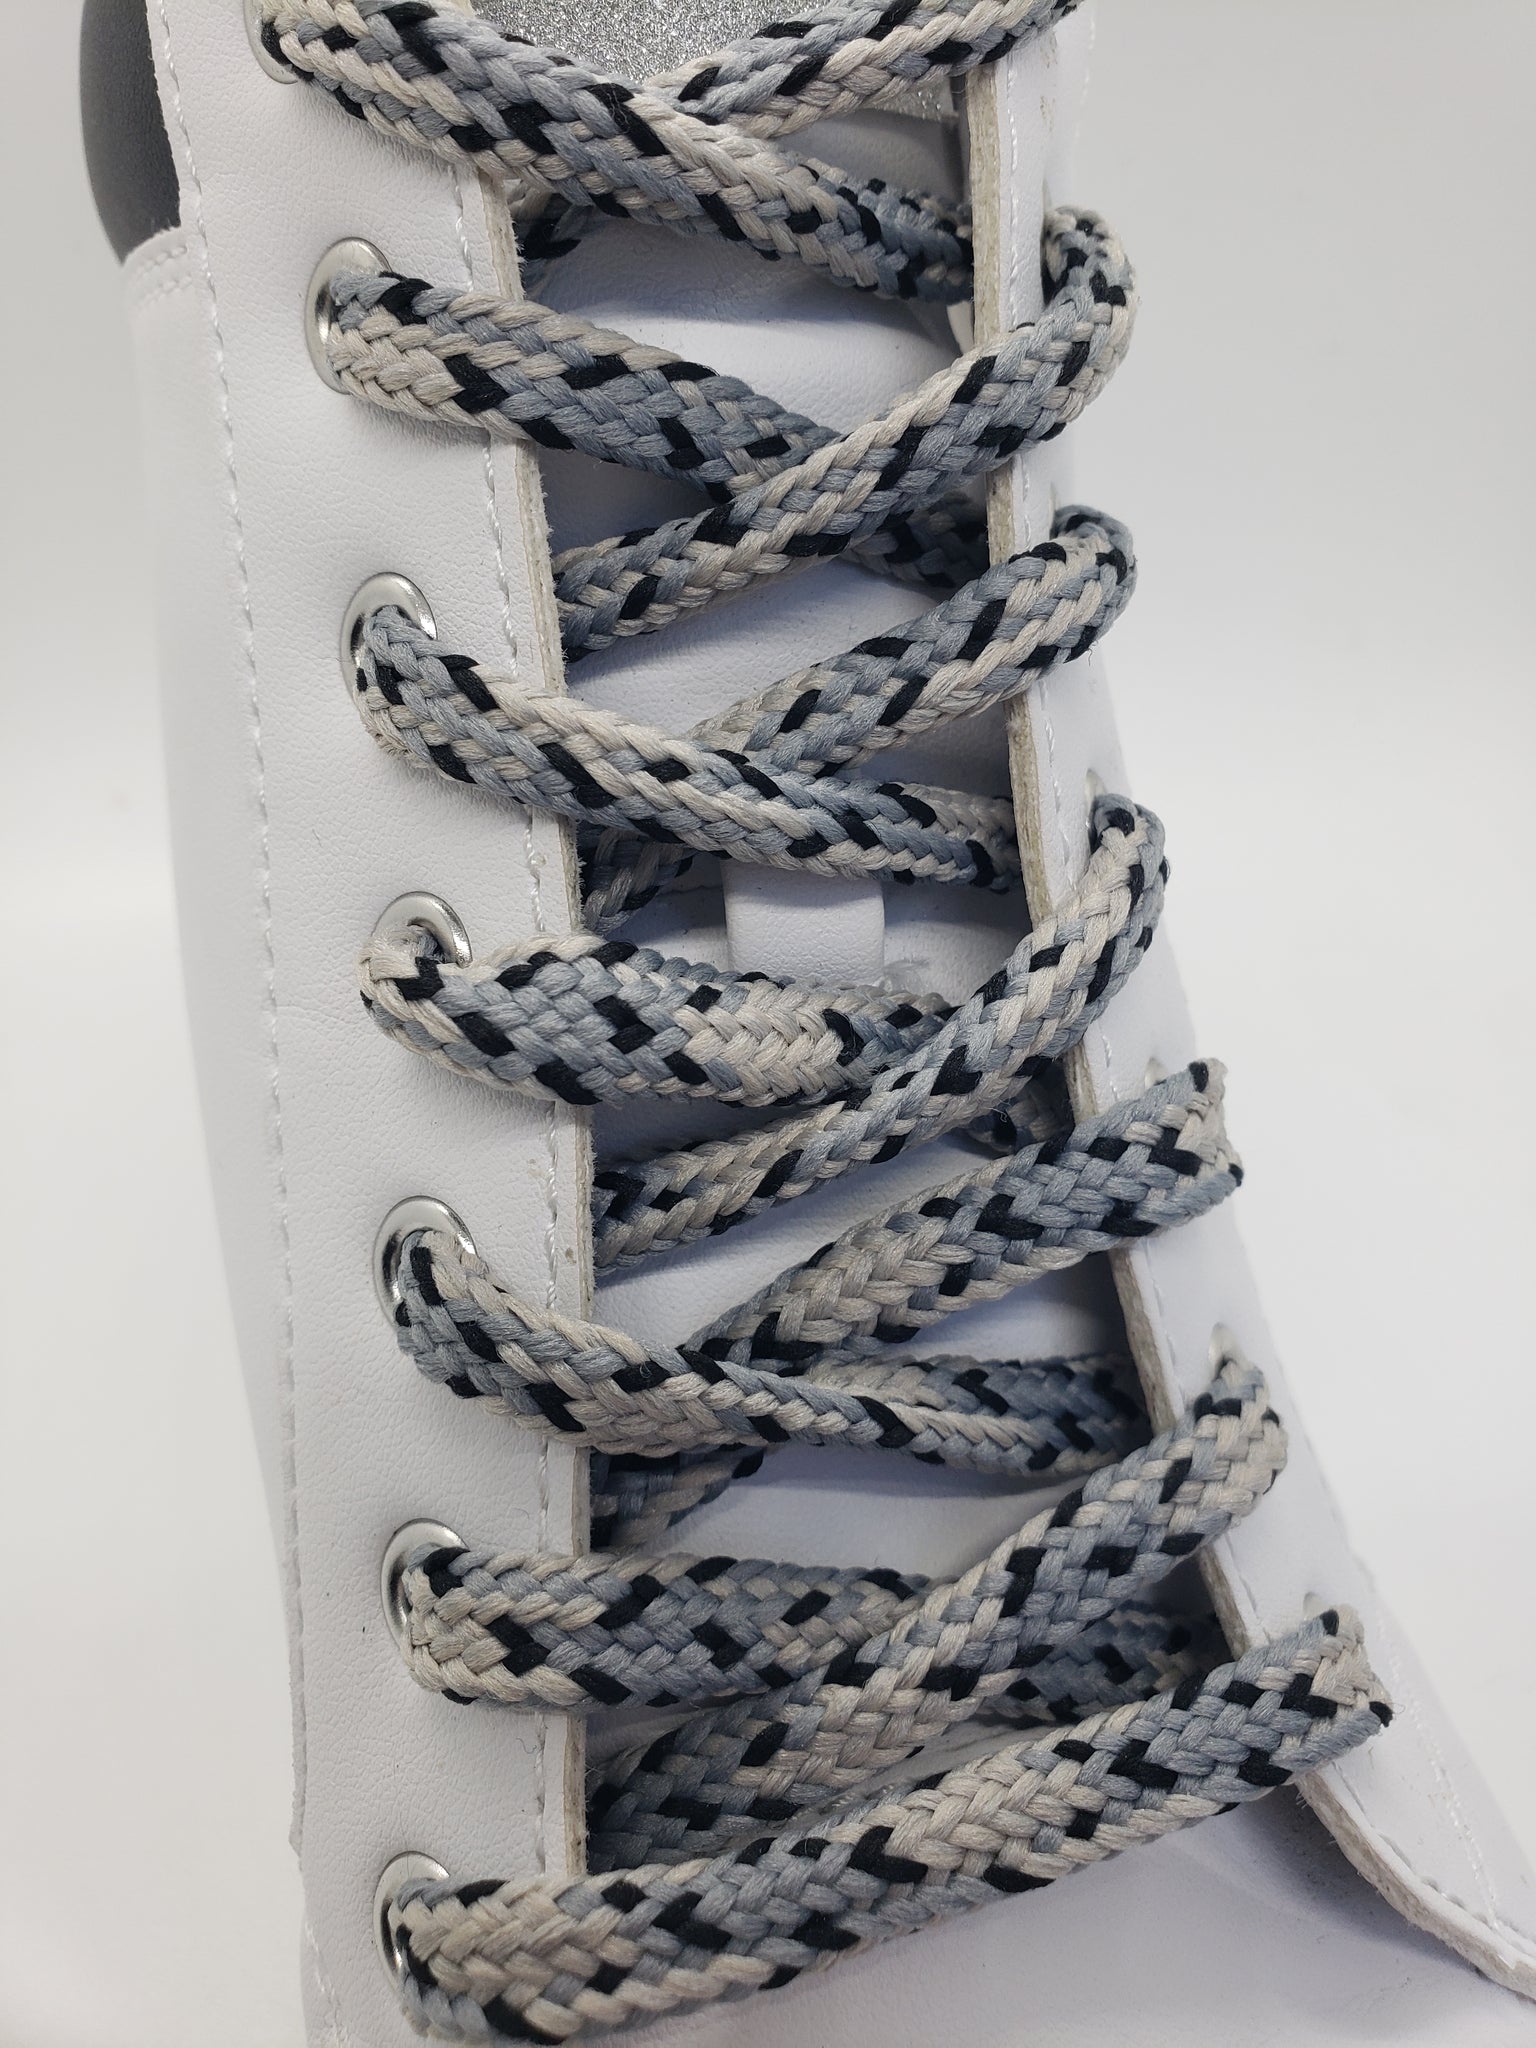 Hybrid Snakeskin Shoelaces - Gray and Silver